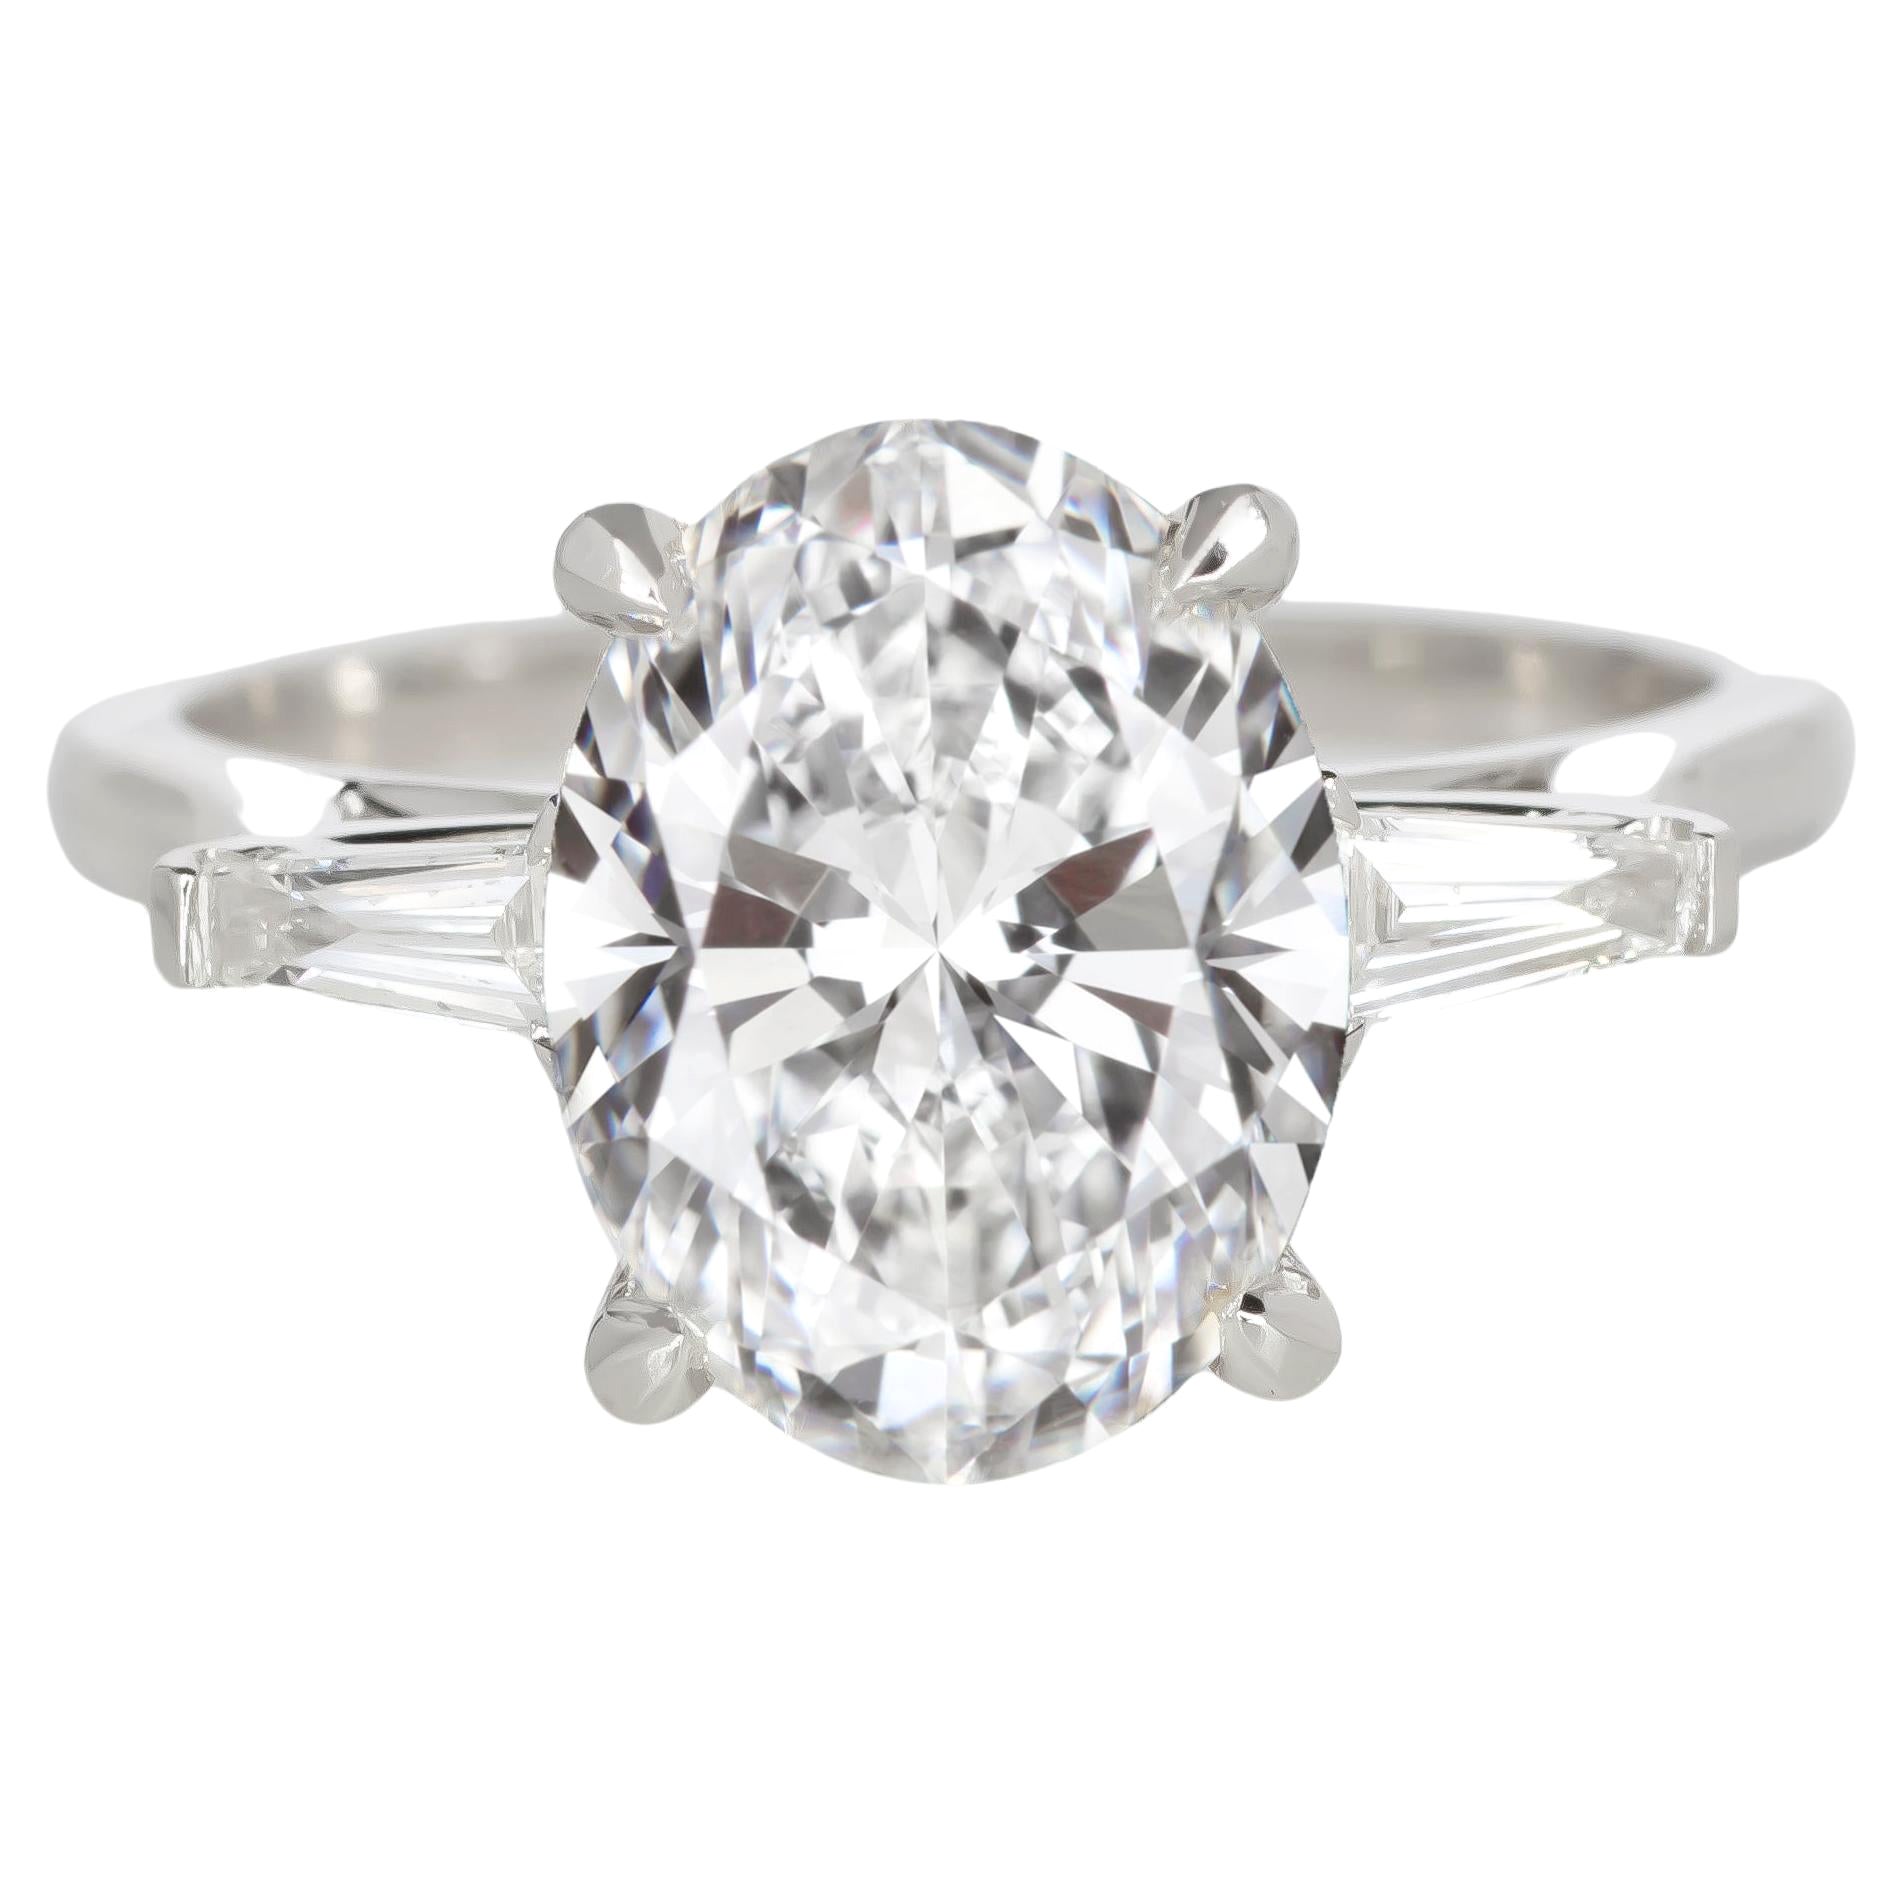 GIA Certified 3 Carat Oval Diamond Ring MADE IN ITALY